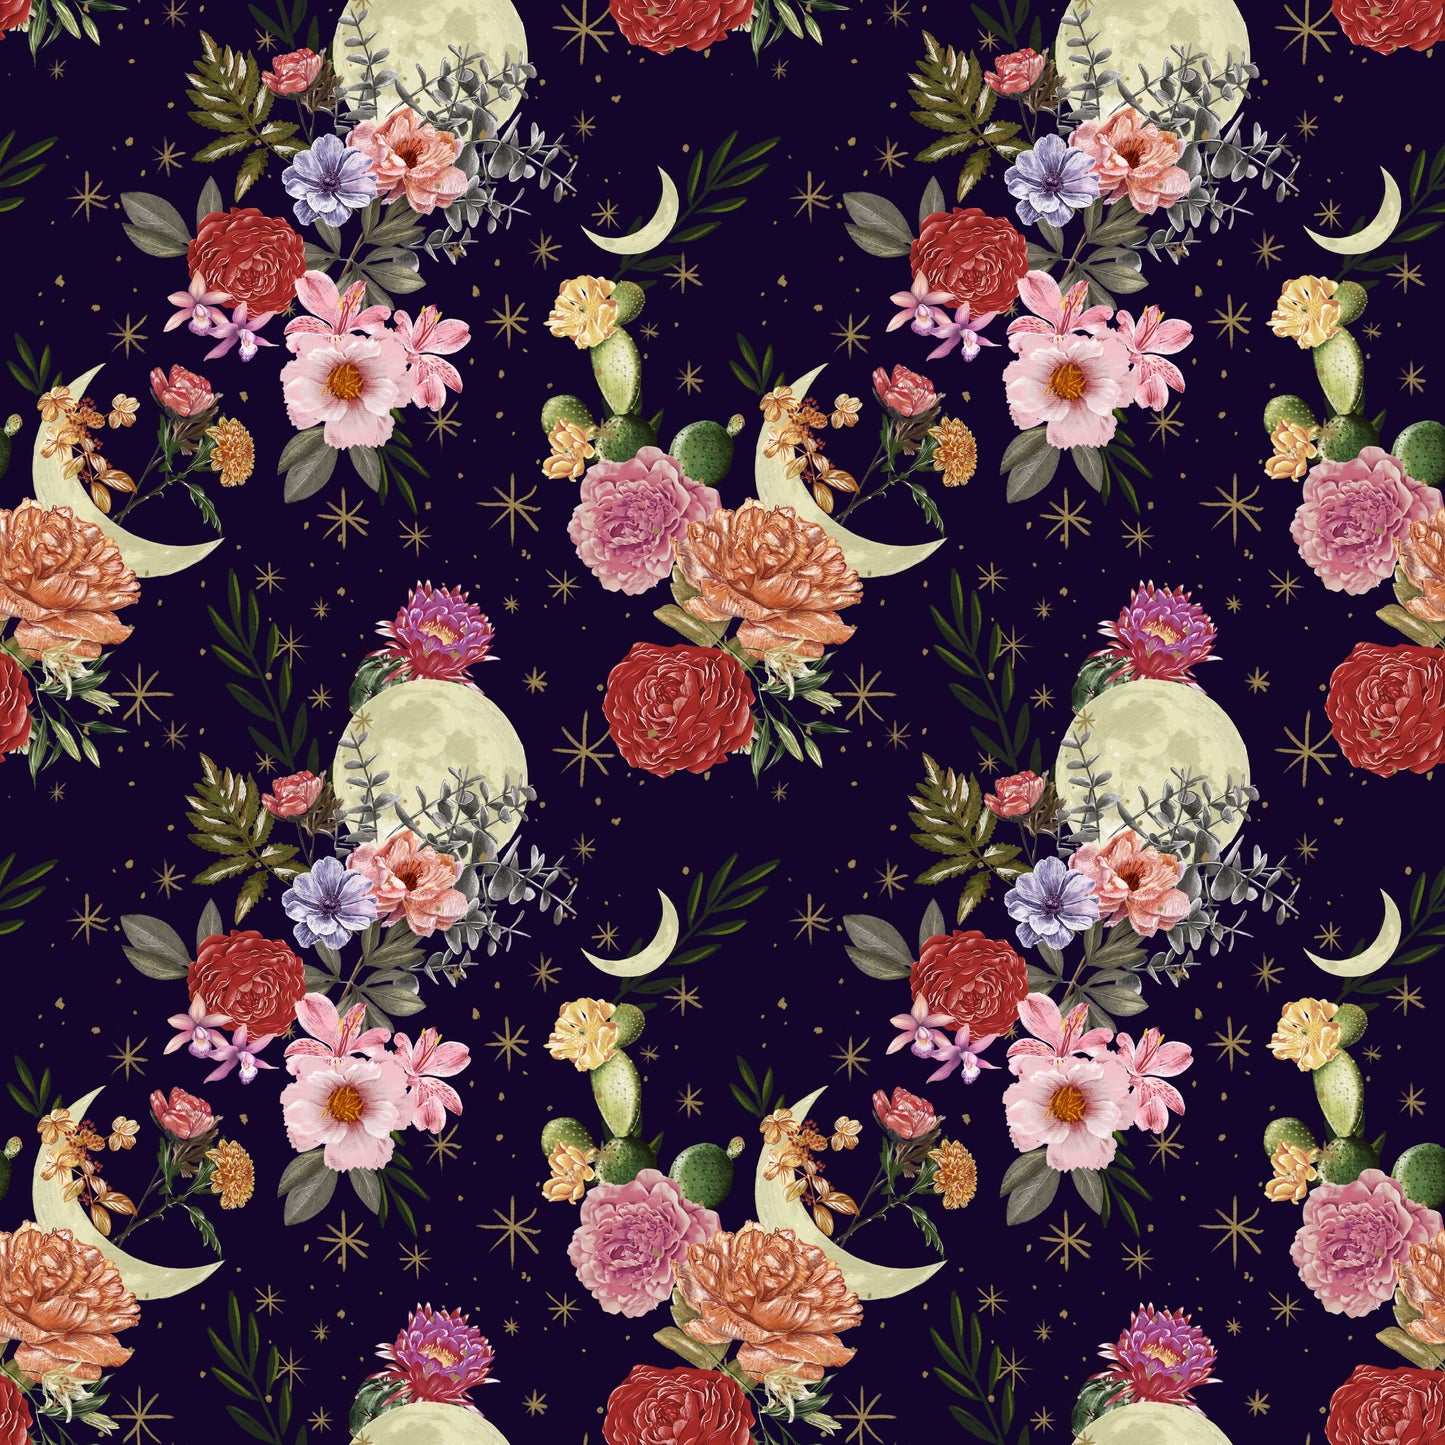 Midnight Rendezvous by Raquel Maciel Moons with Flowers and Cactus Dark Purple    2895-59 Cotton Woven Fabric